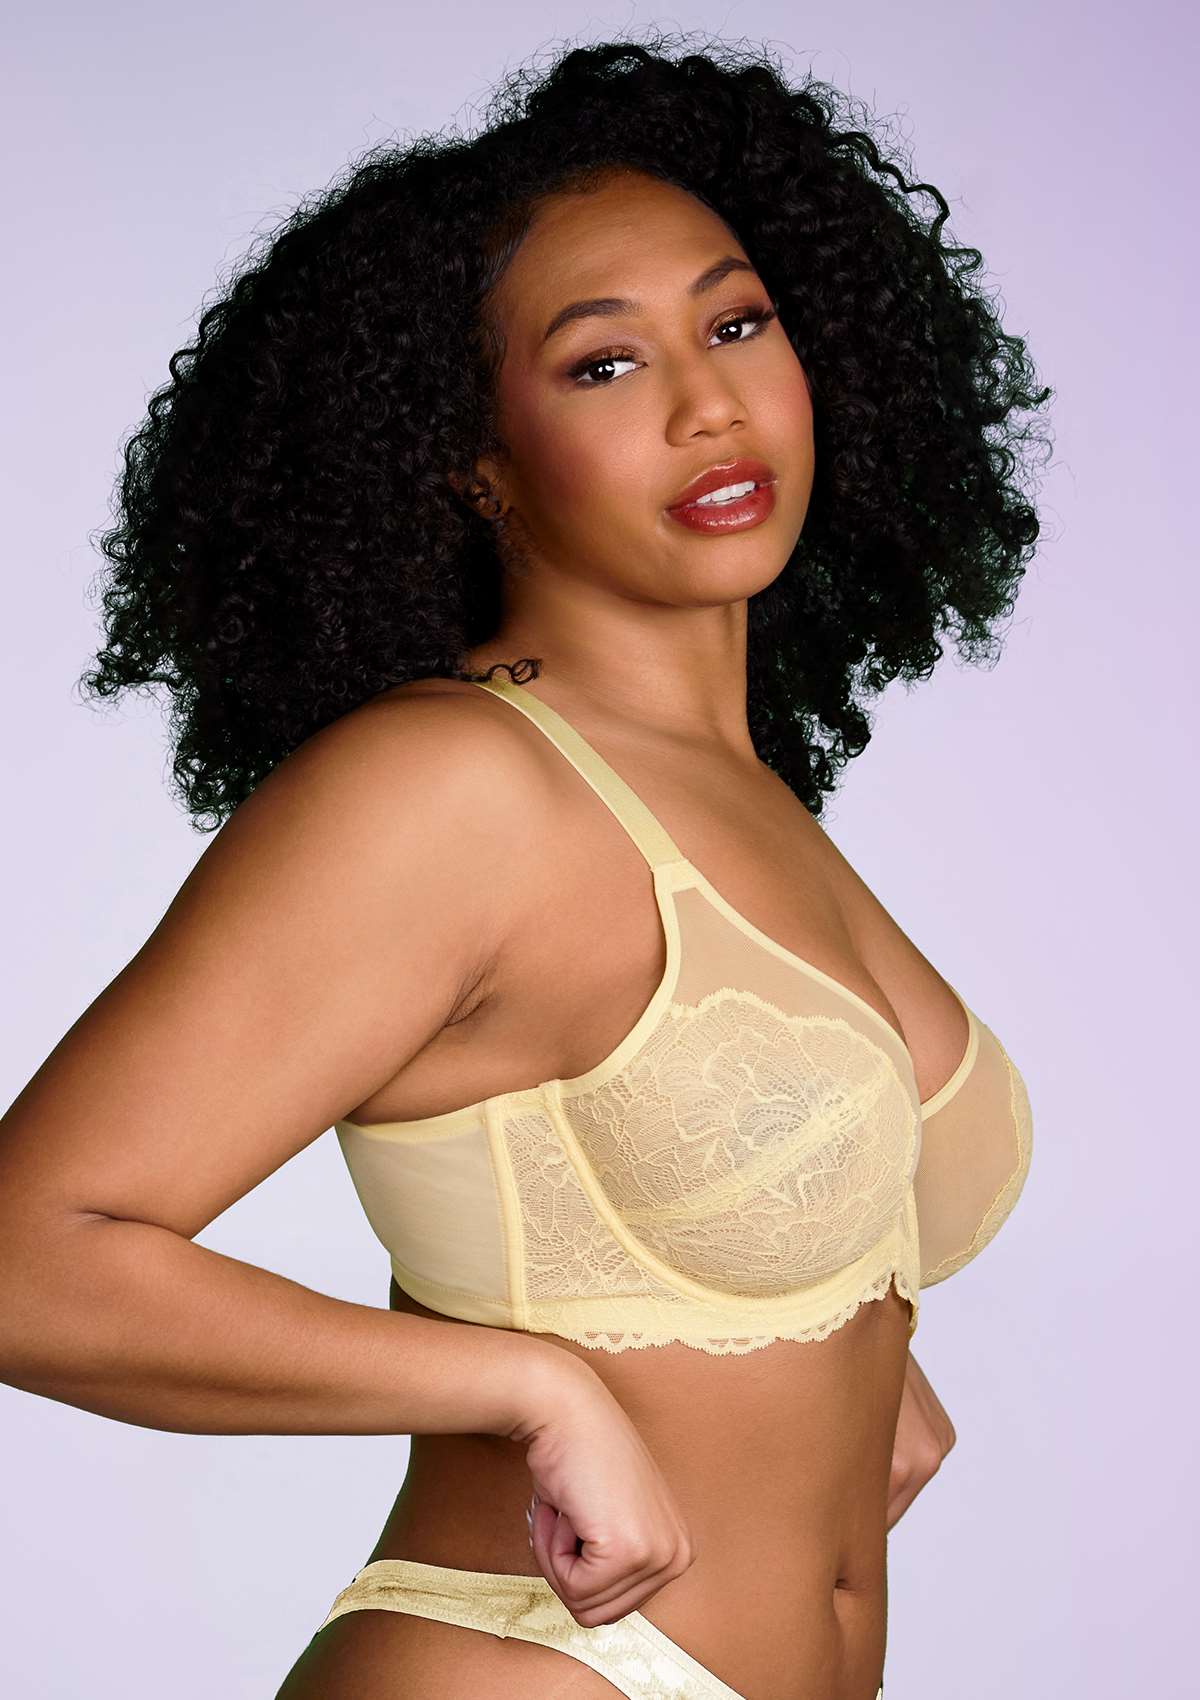 HSIA Blossom Full Coverage Side Support Bra: Designed For Heavy Busts - Light Yellow / 42 / H